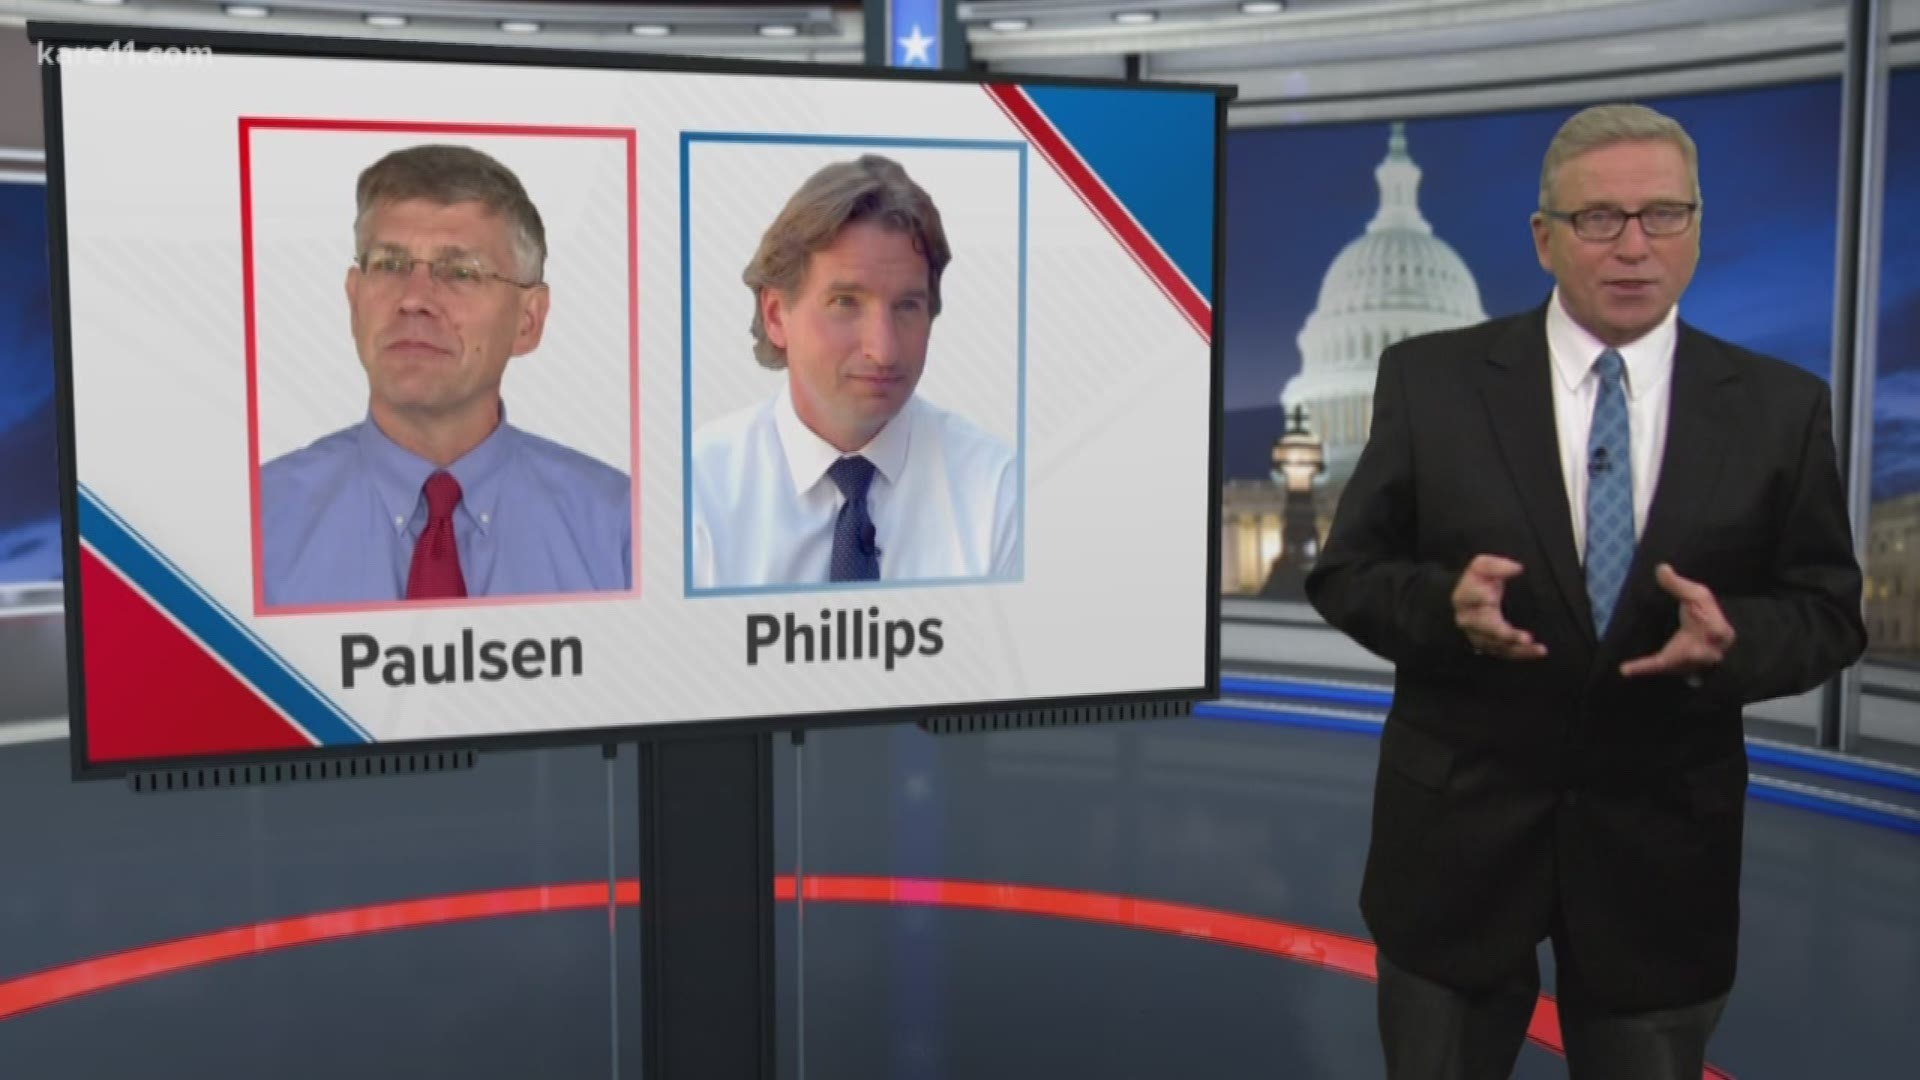 Political newcomer Dean Phillips is challenging five-term incumbent Congressman Erik Paulsen in Minnesota's 3rd Congressional District. Phillips has much more name recognition than any of Paulsen's previous Democratic opponents because of an attack ad bli